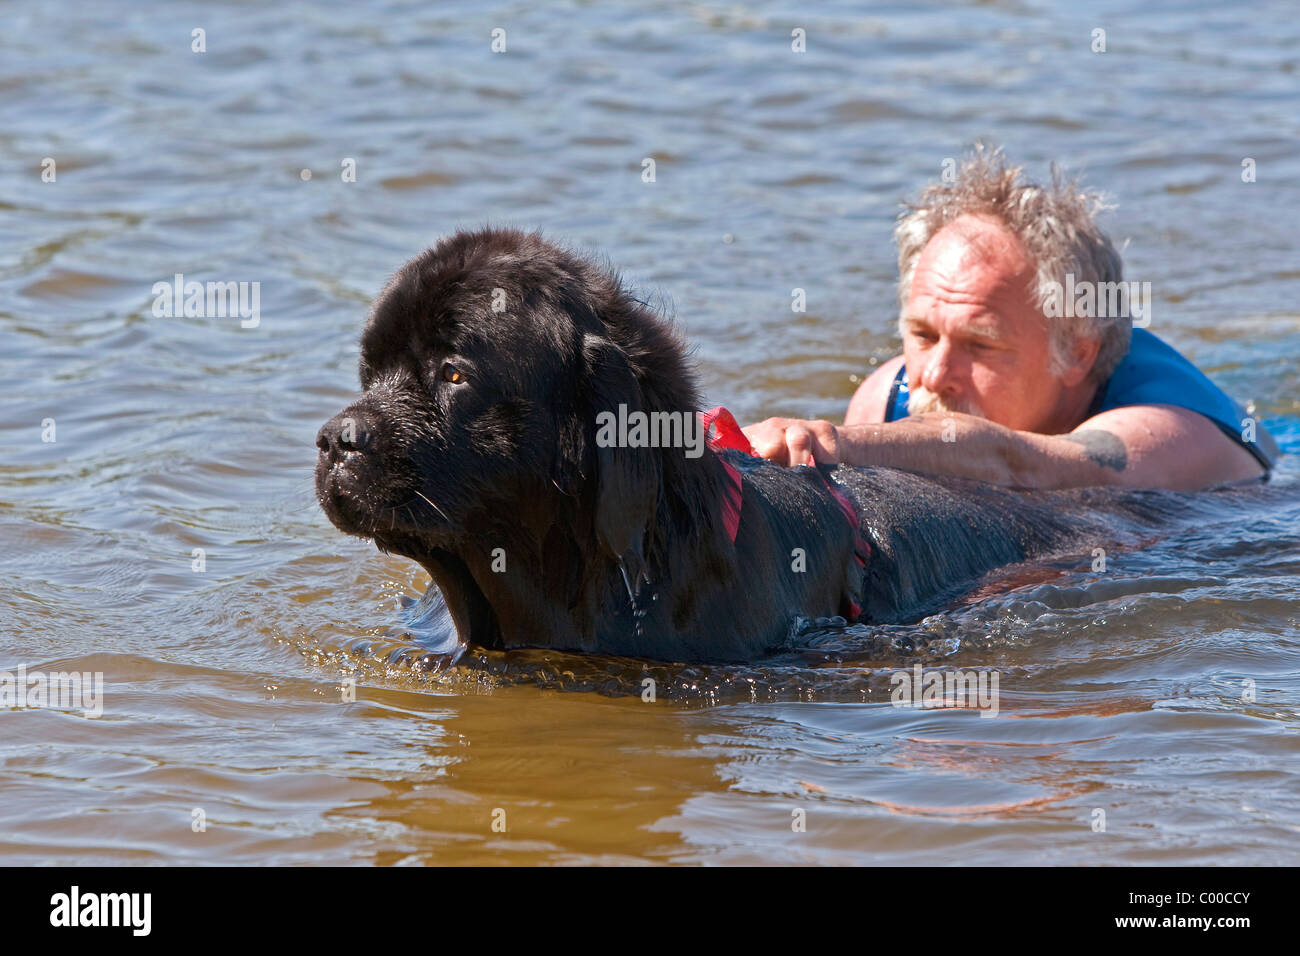 Newfoundland Dog rescuing person from drowning Stock Photo